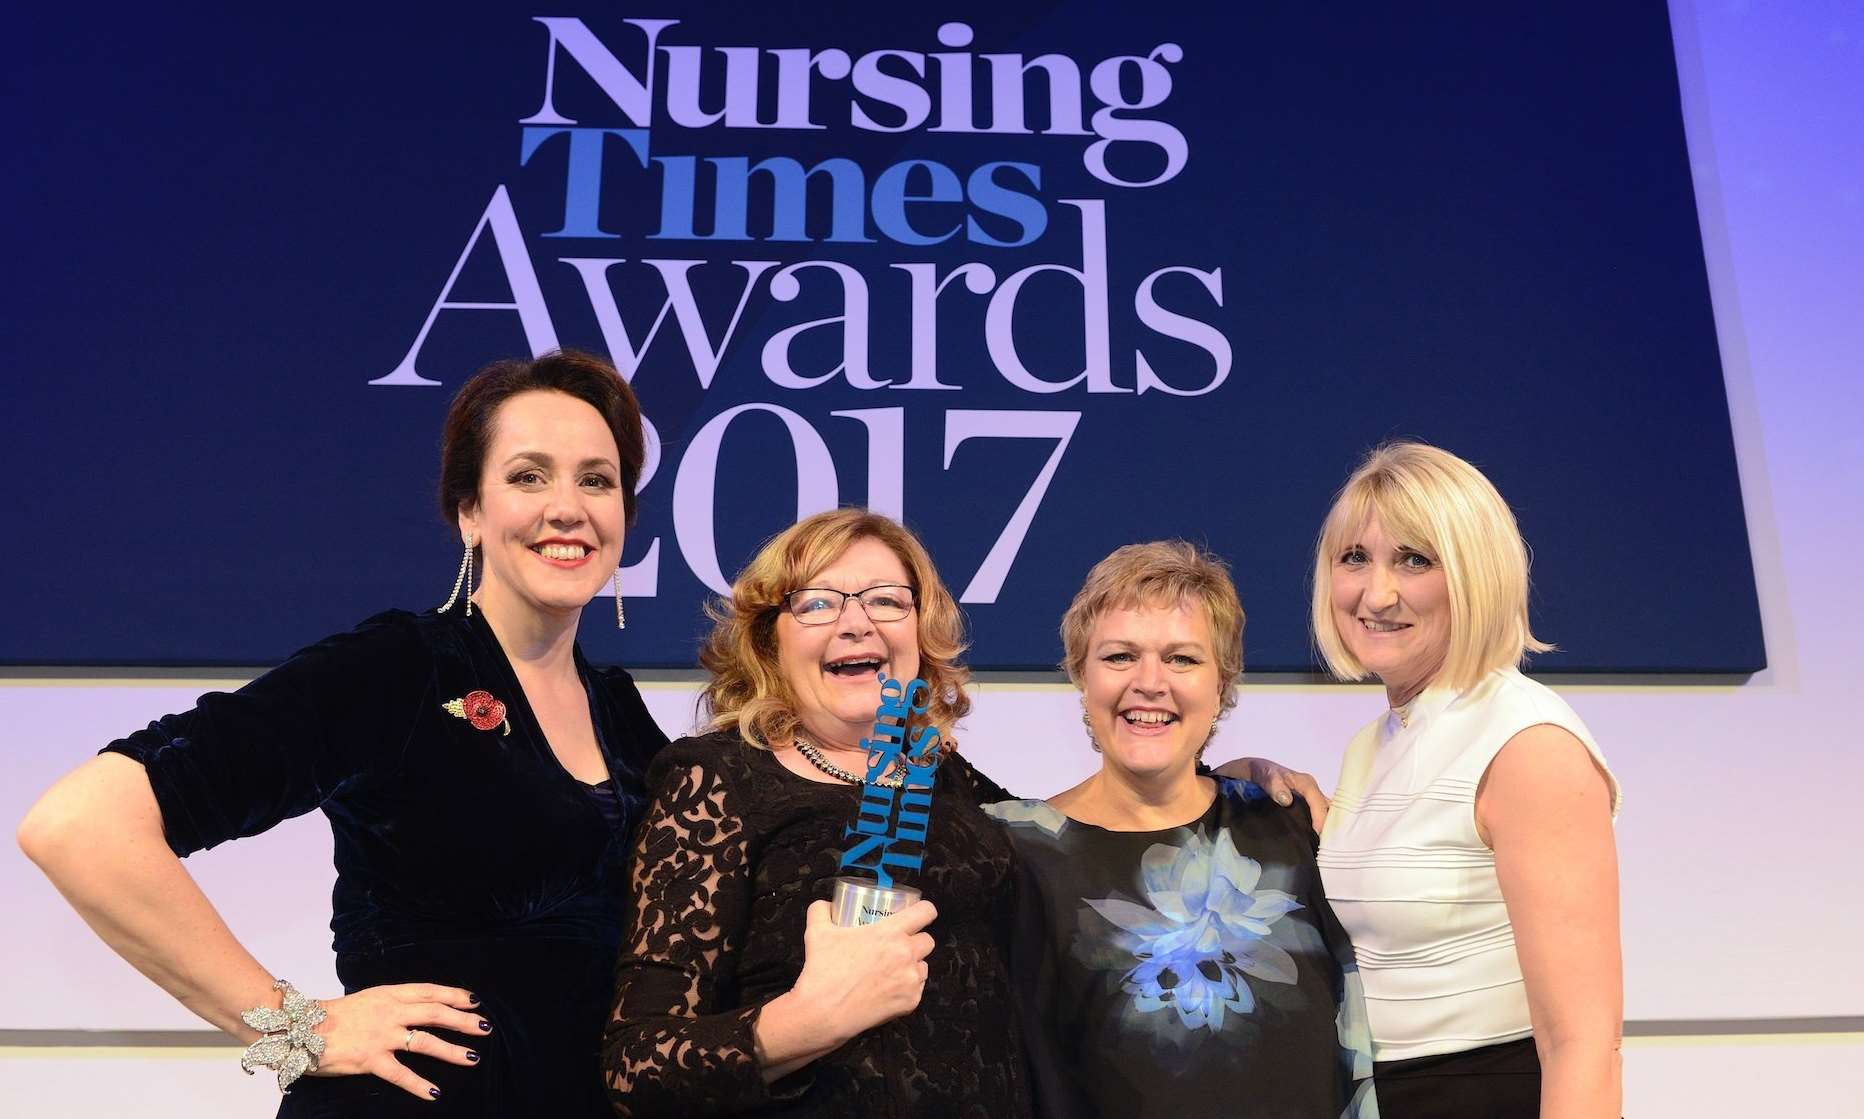 Left to right: Jenni Middleton, Editor of the Nursing Times, Sandra Hanson, Helen Ripper and a representative of Ontex Healthcare who sponsor the award.